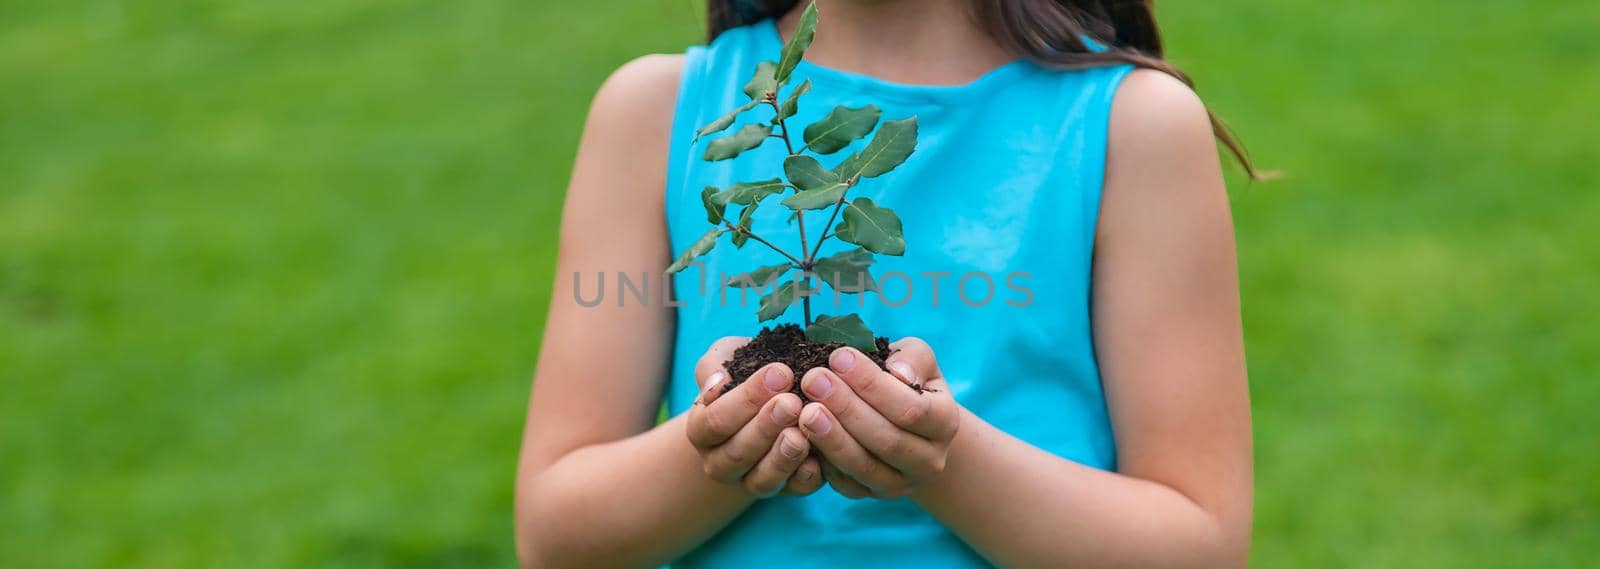 The child holds the plant and soil in his hands. Selective focus. by yanadjana